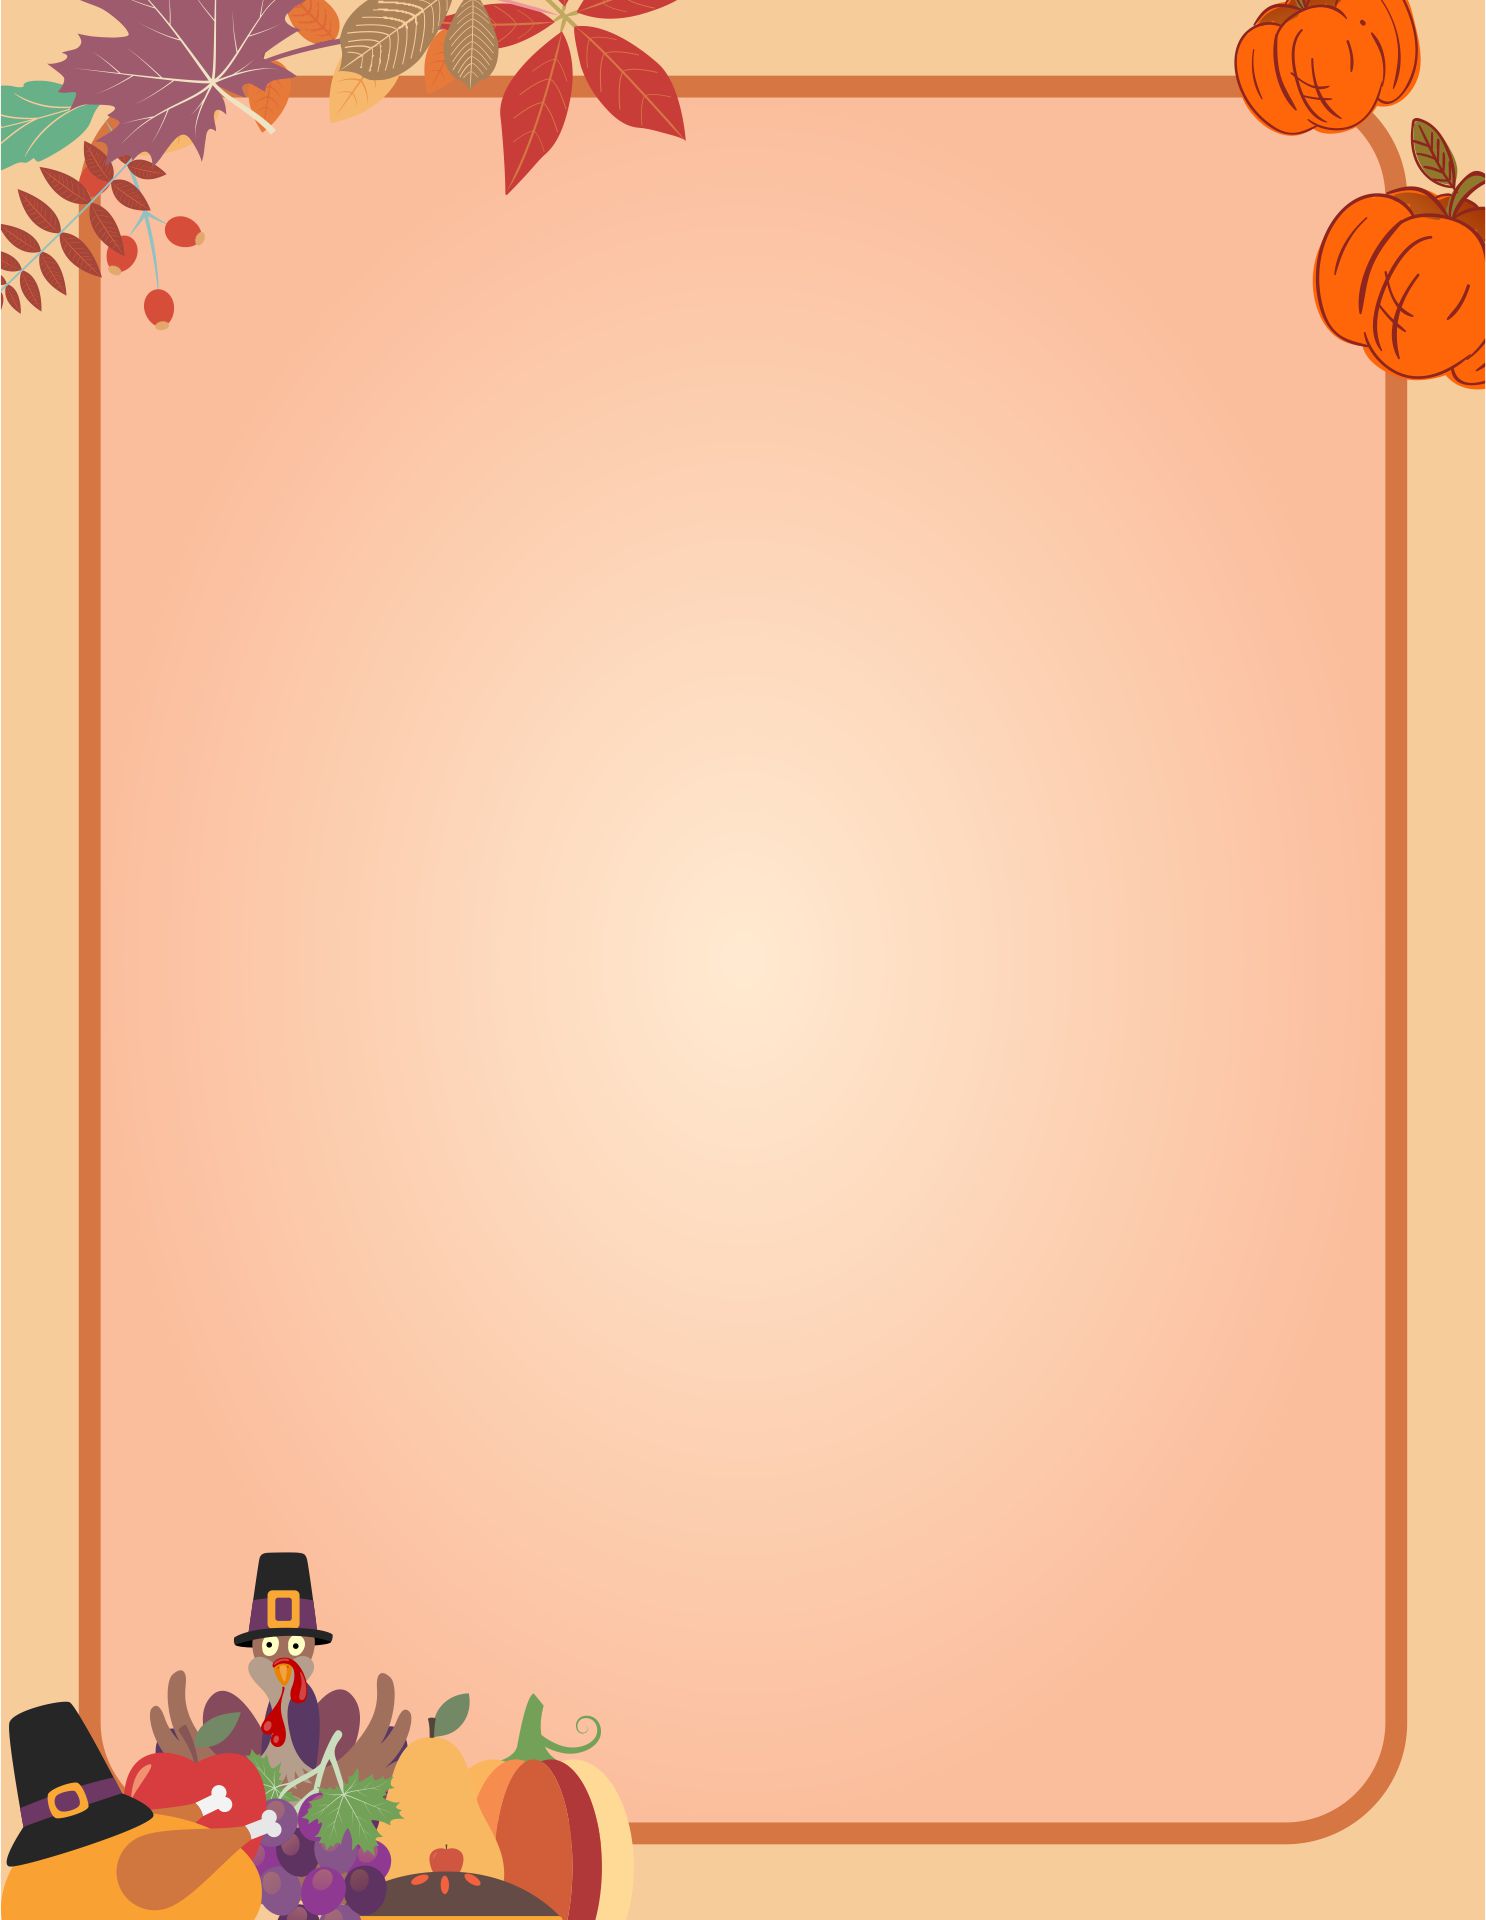 6-best-images-of-free-printable-thanksgiving-letter-head-free